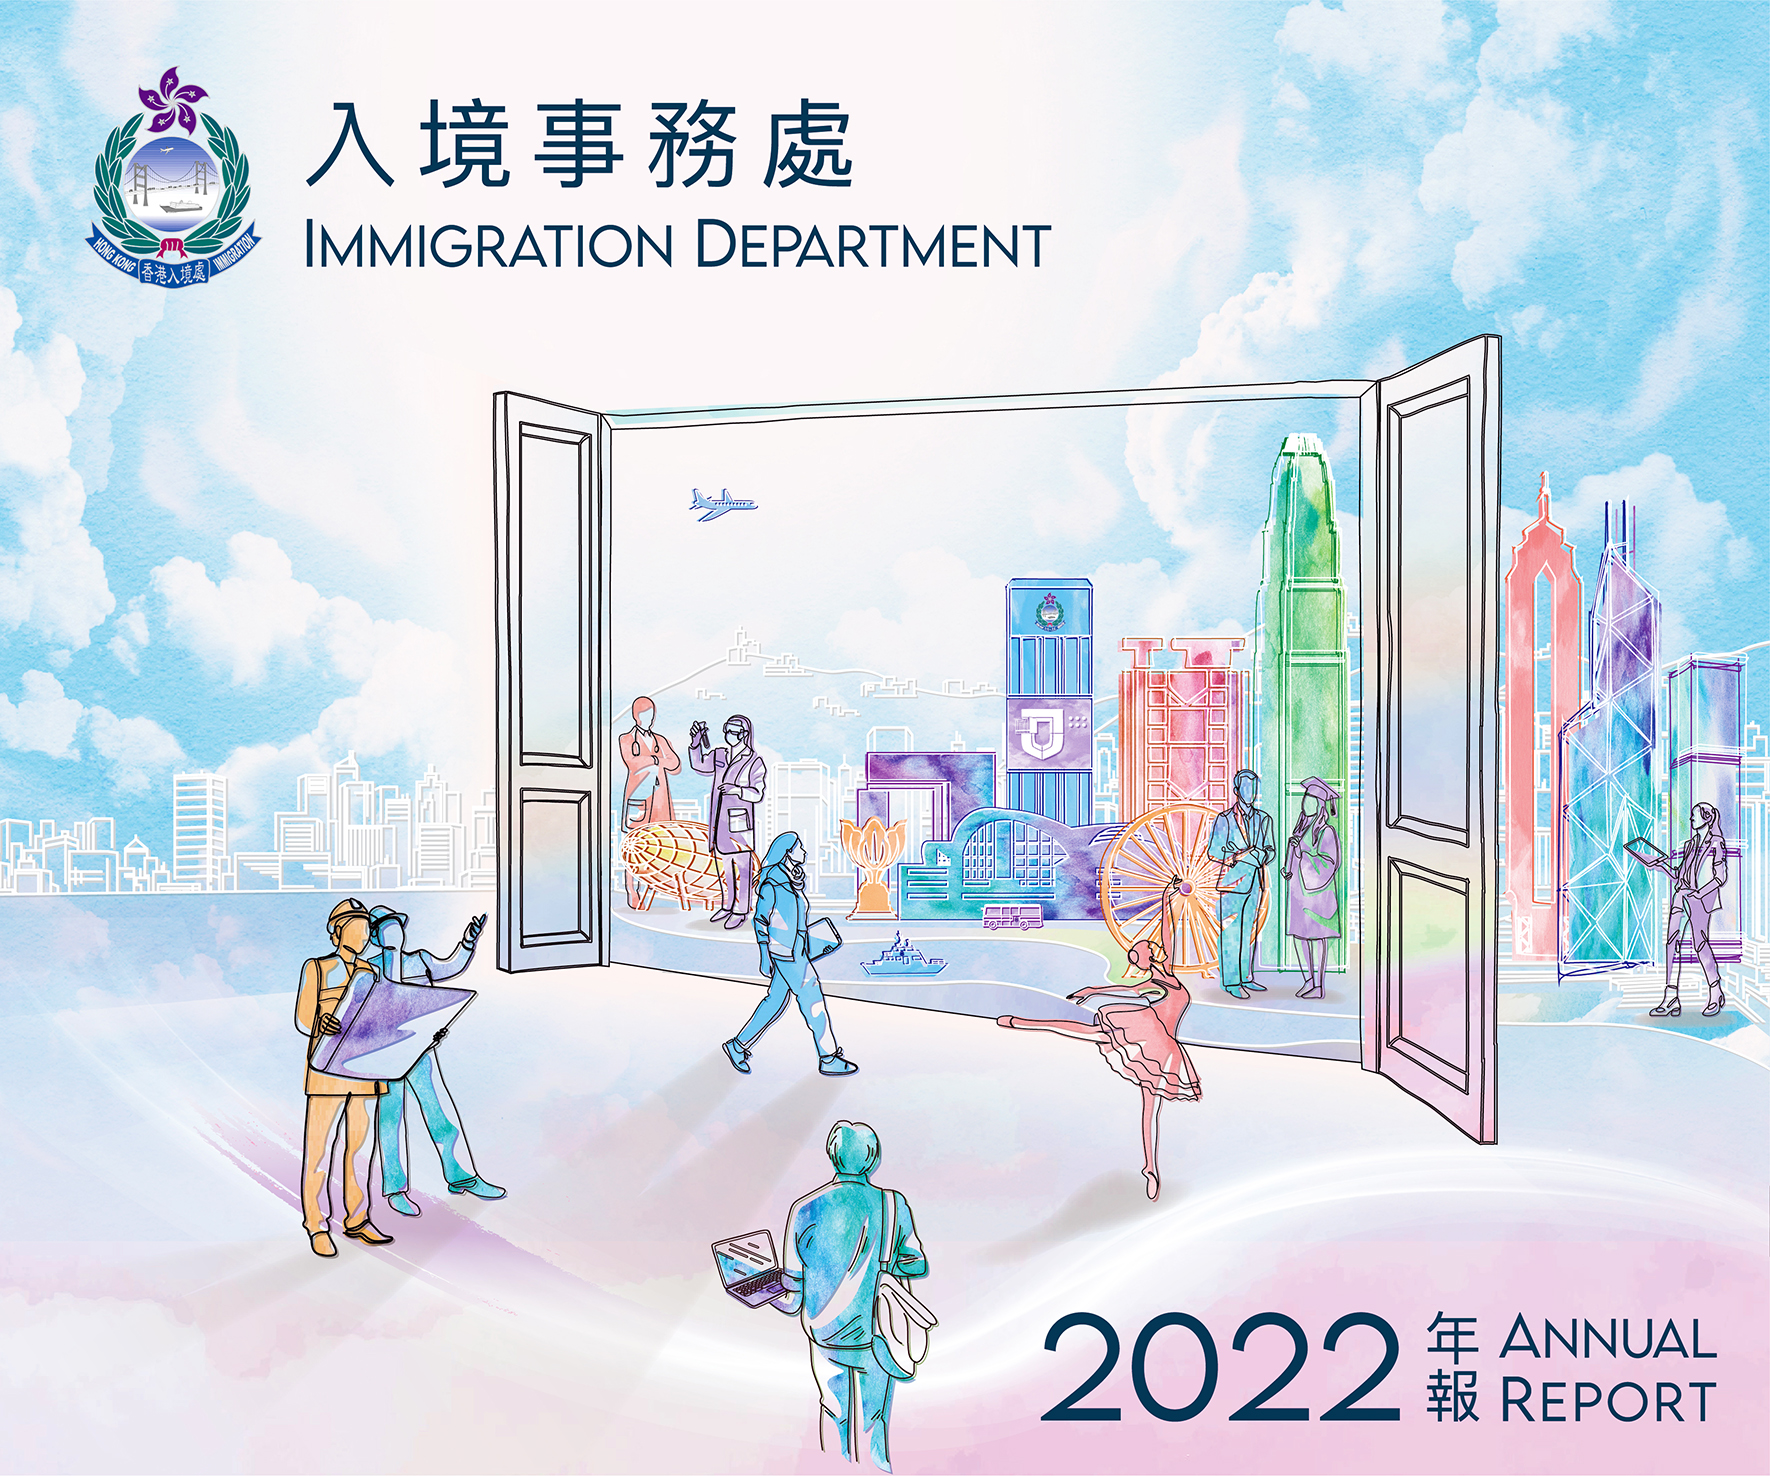 Annual Report 2022: Unabridged and Booklet